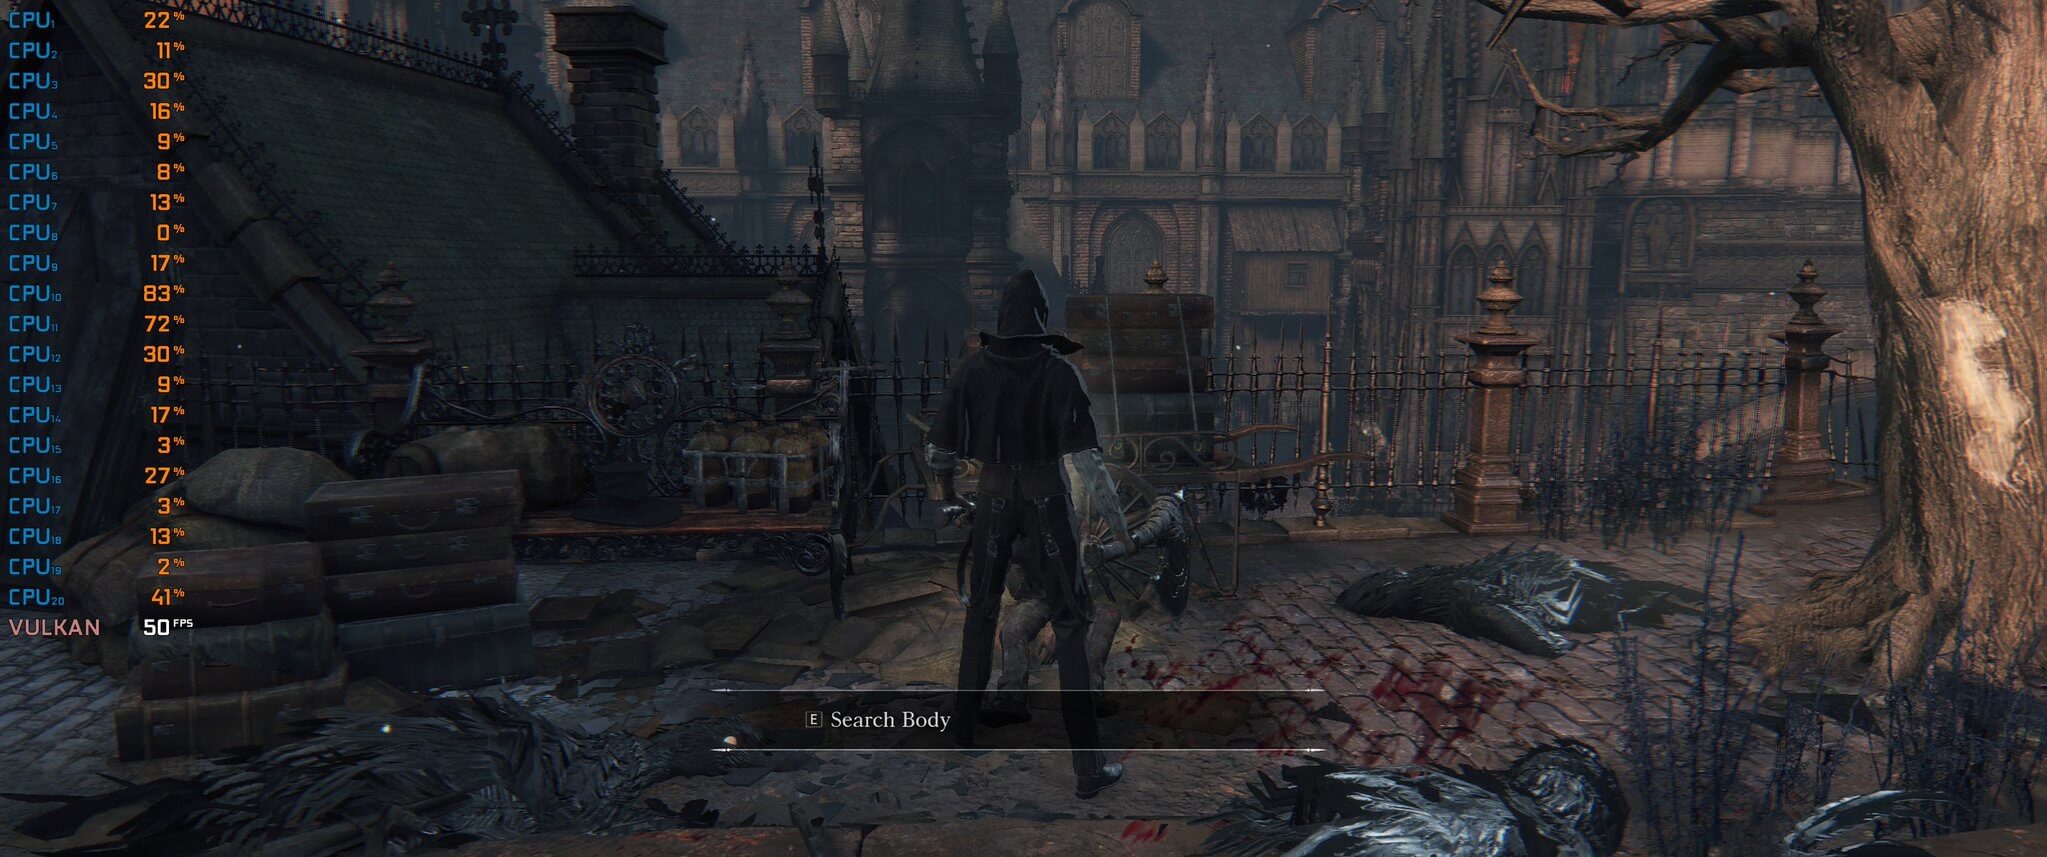 PC build of Bloodborne leaked and has ultrawide support! Runs great too! :  r/shittydarksouls